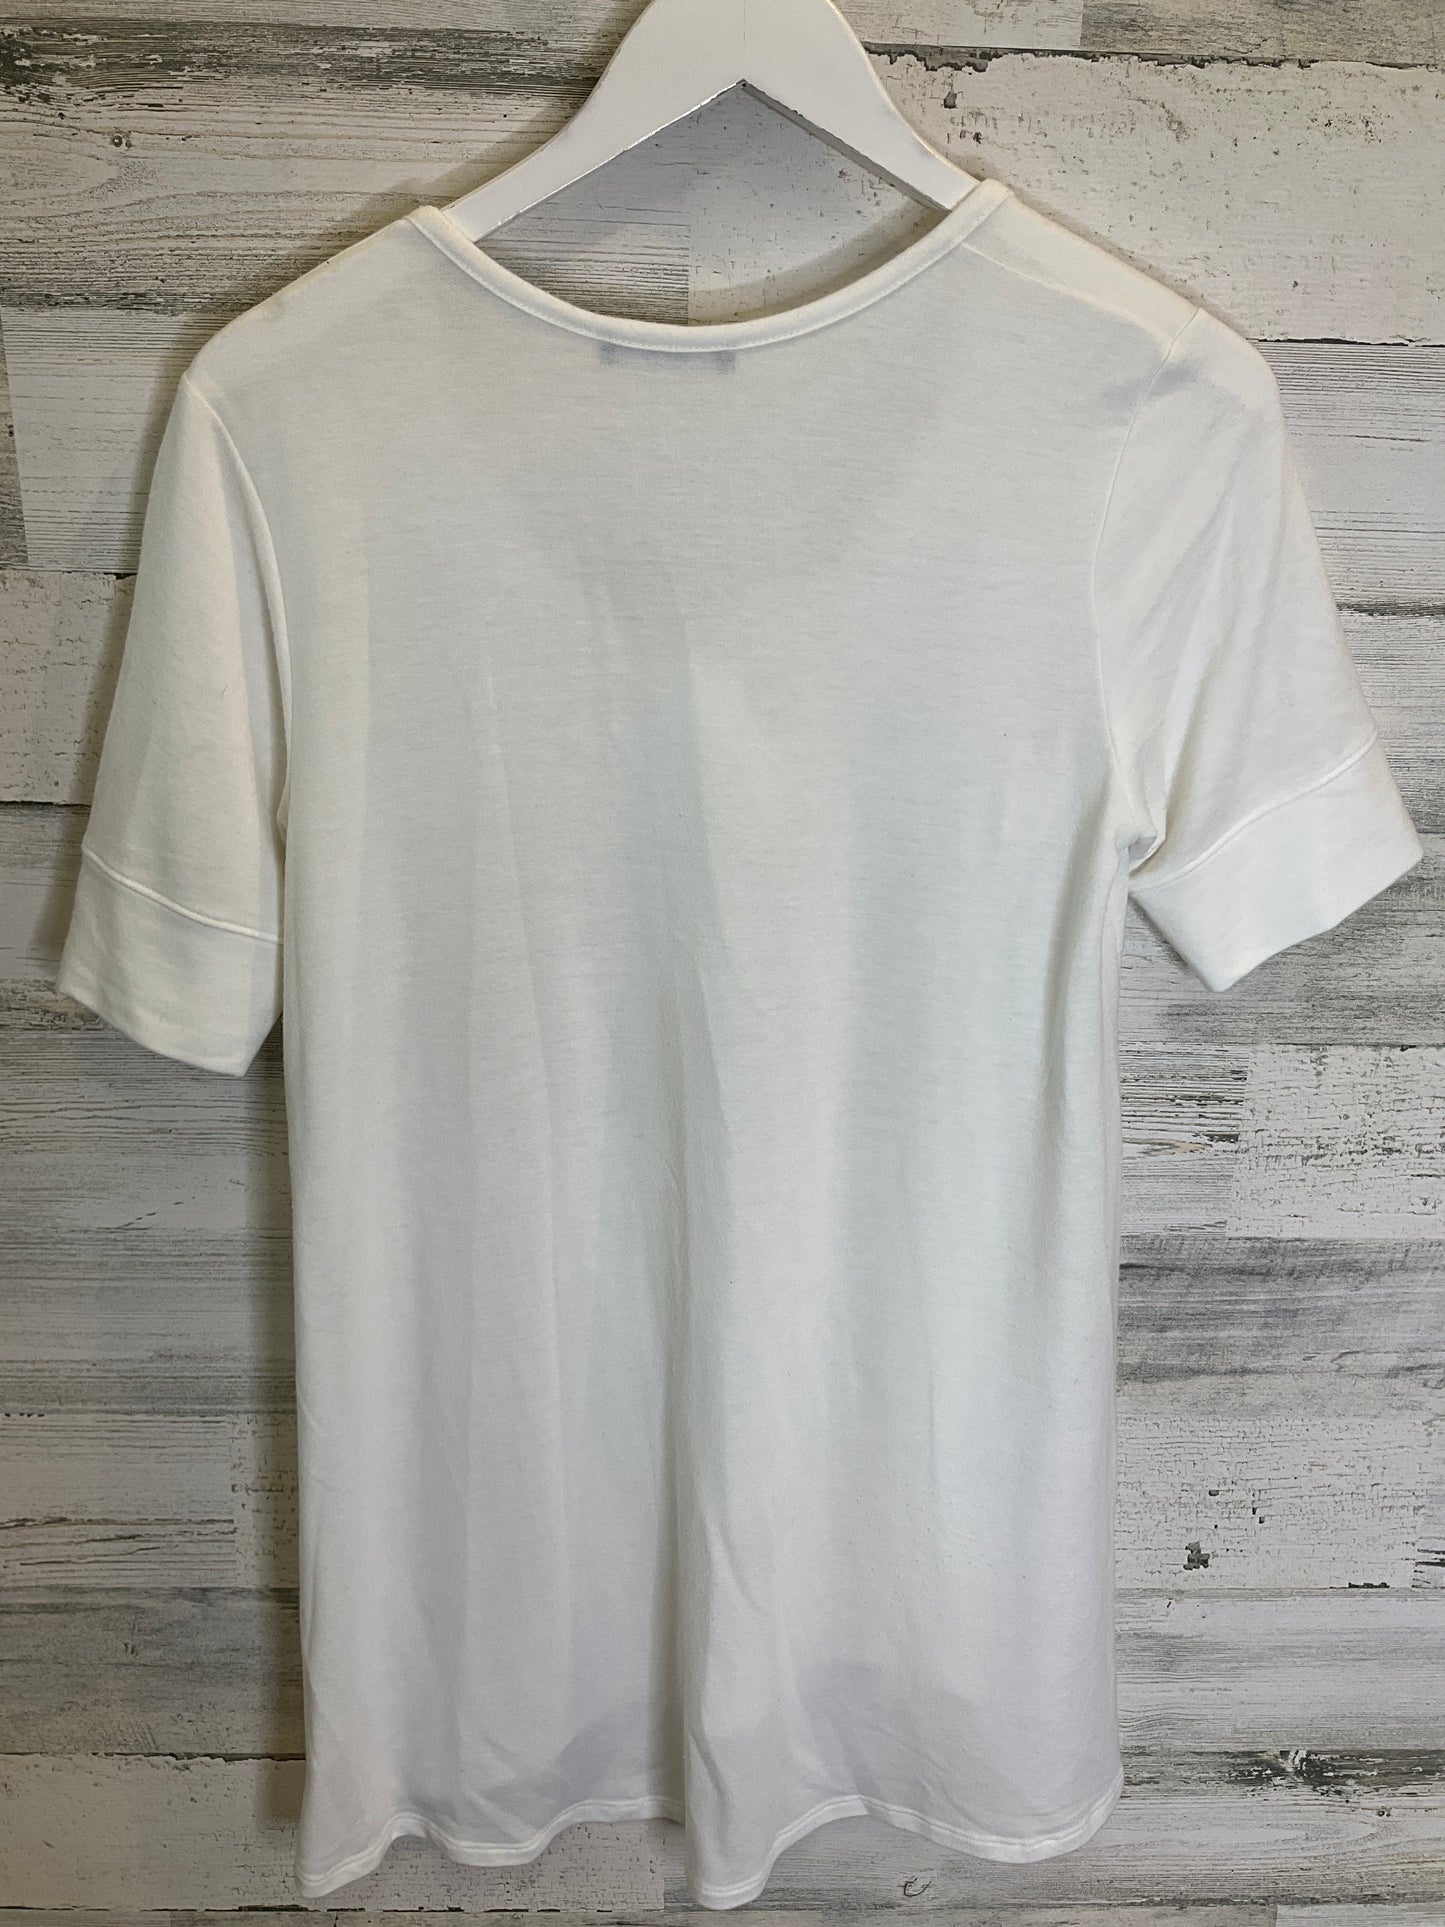 White Top Short Sleeve Nally And Millie, Size S